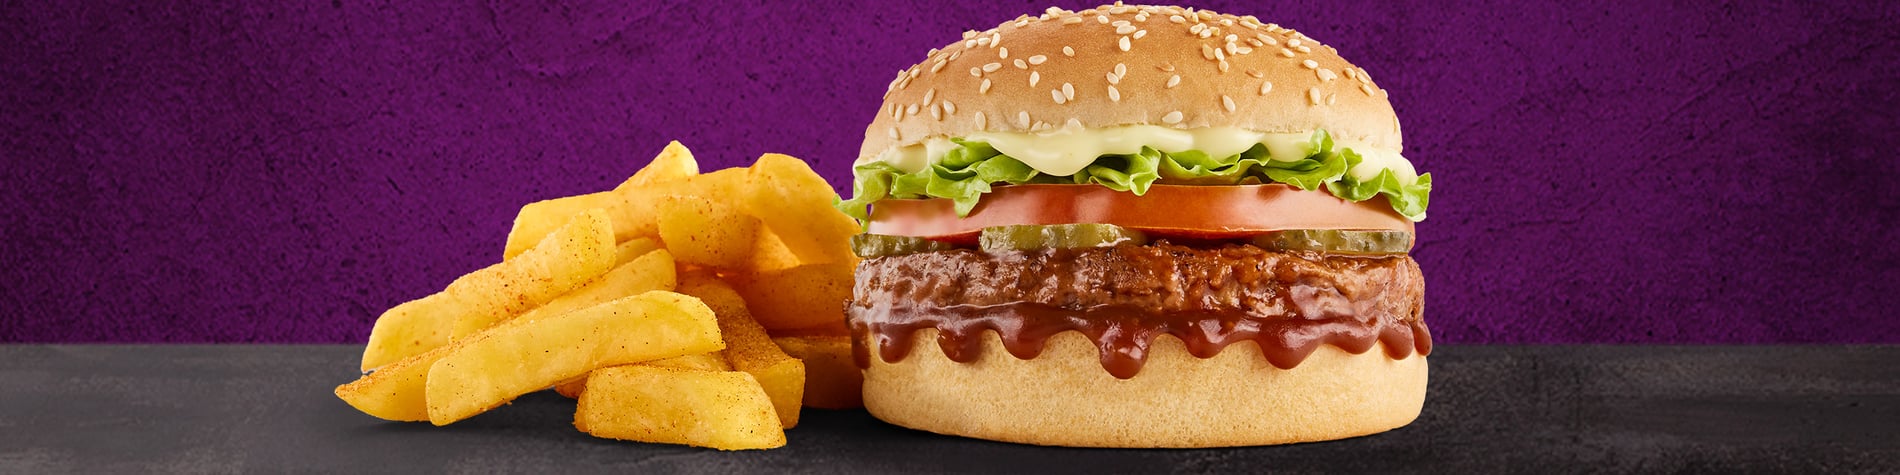 The NEW Mo’MjojoTM Burger Meal from Steers® Midway Crossing Shopping Centre. 2 Flame-Grilled pure beef patties, pineapple, macon, tomato, lettuce, and small Famous Hand-Cut Chips, on a purple background.